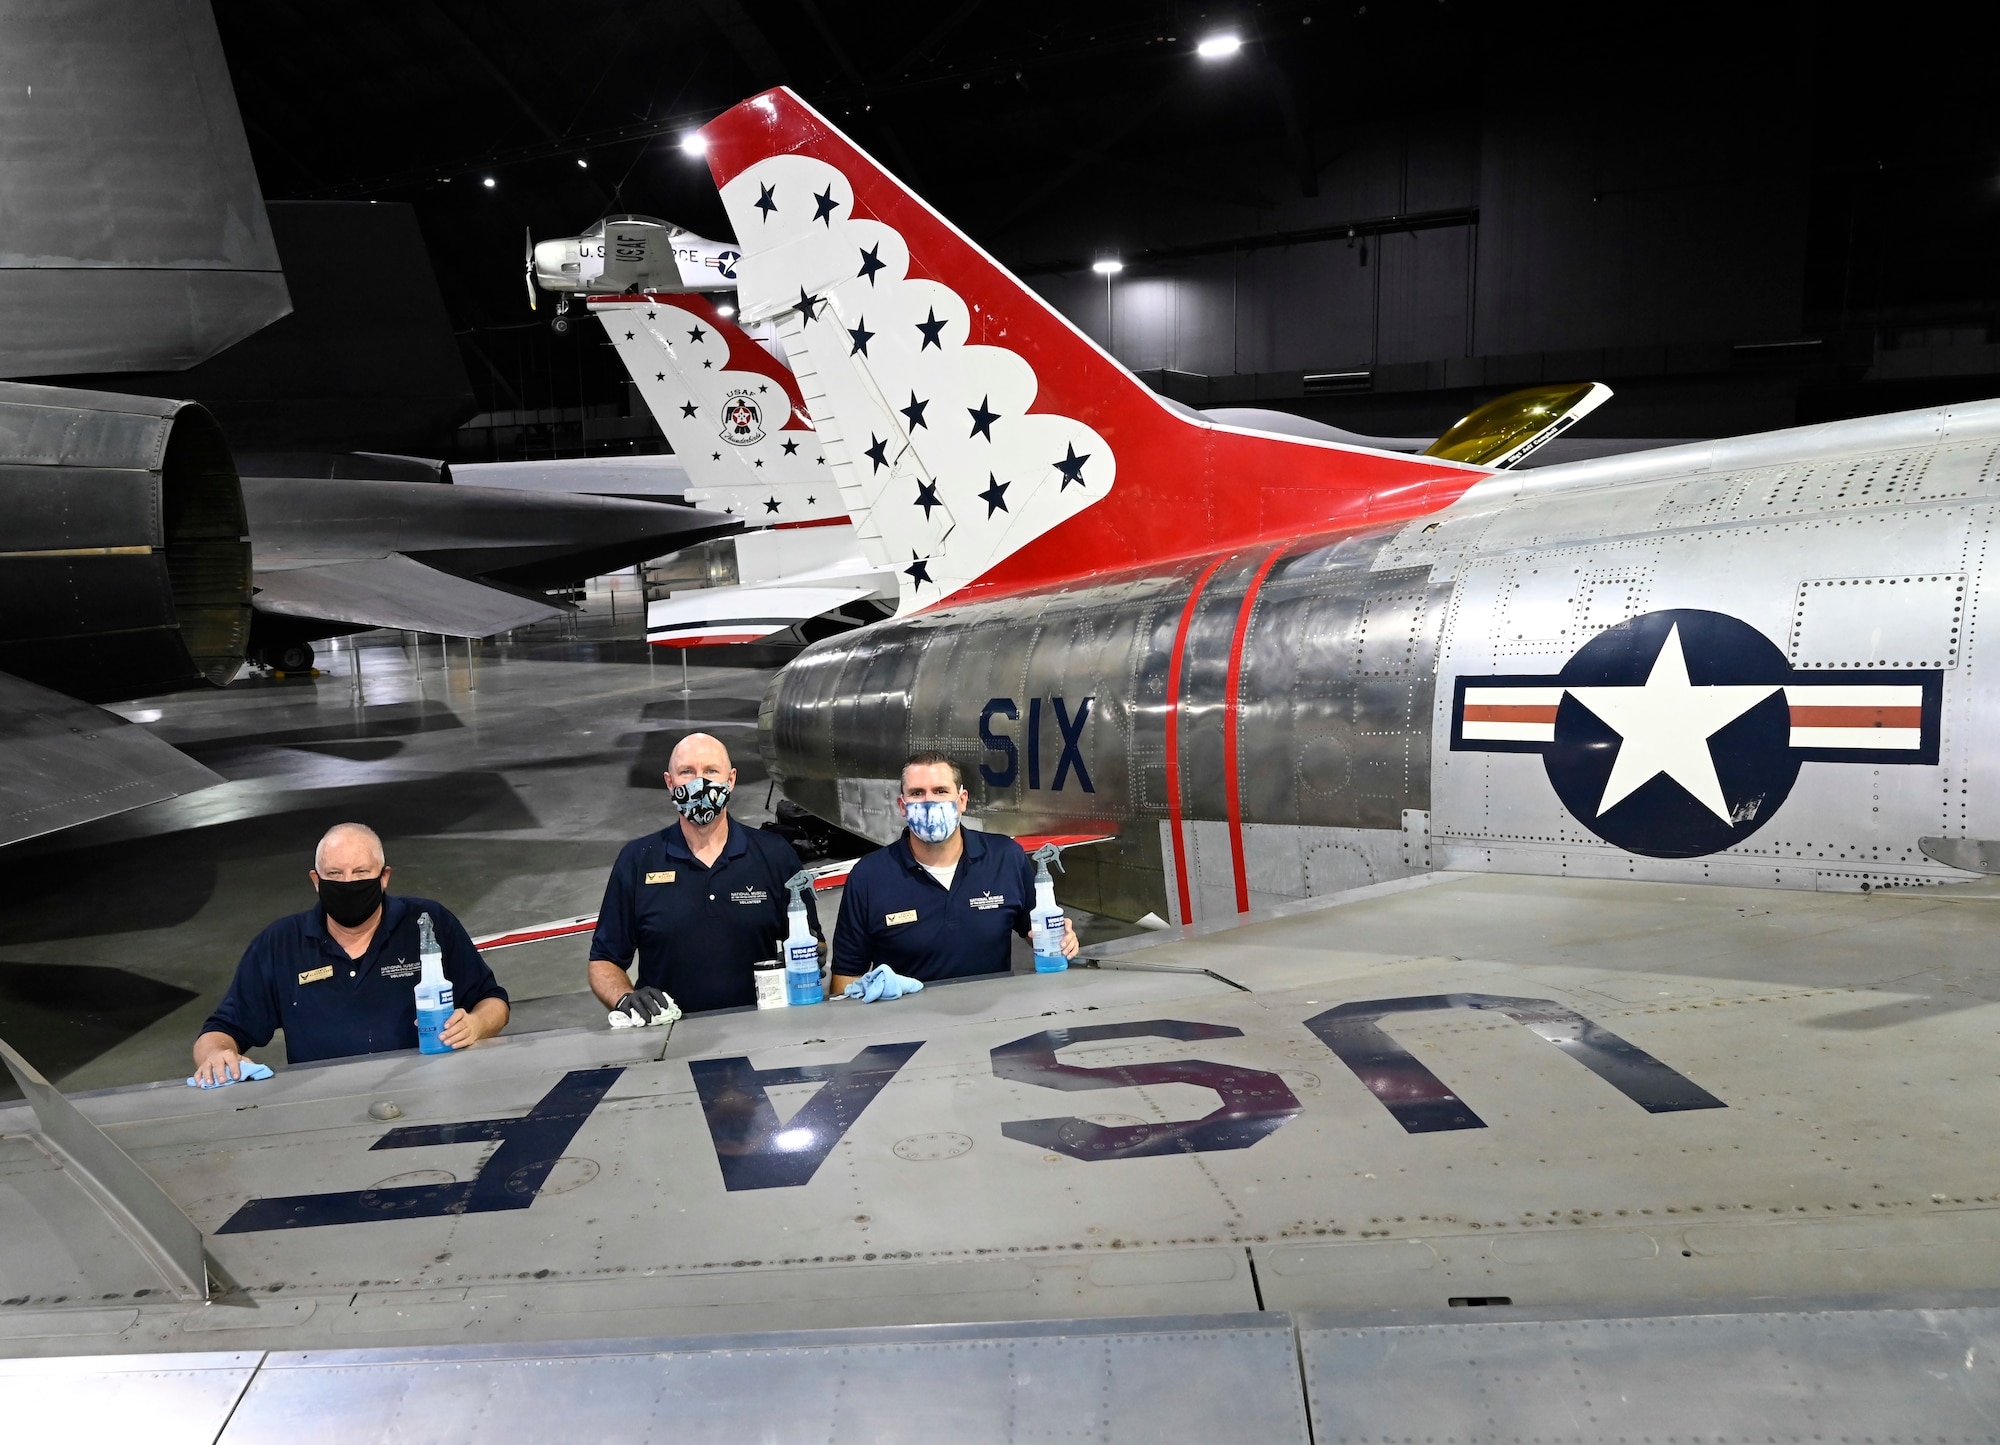 Air Force Veterans pose for photograph.